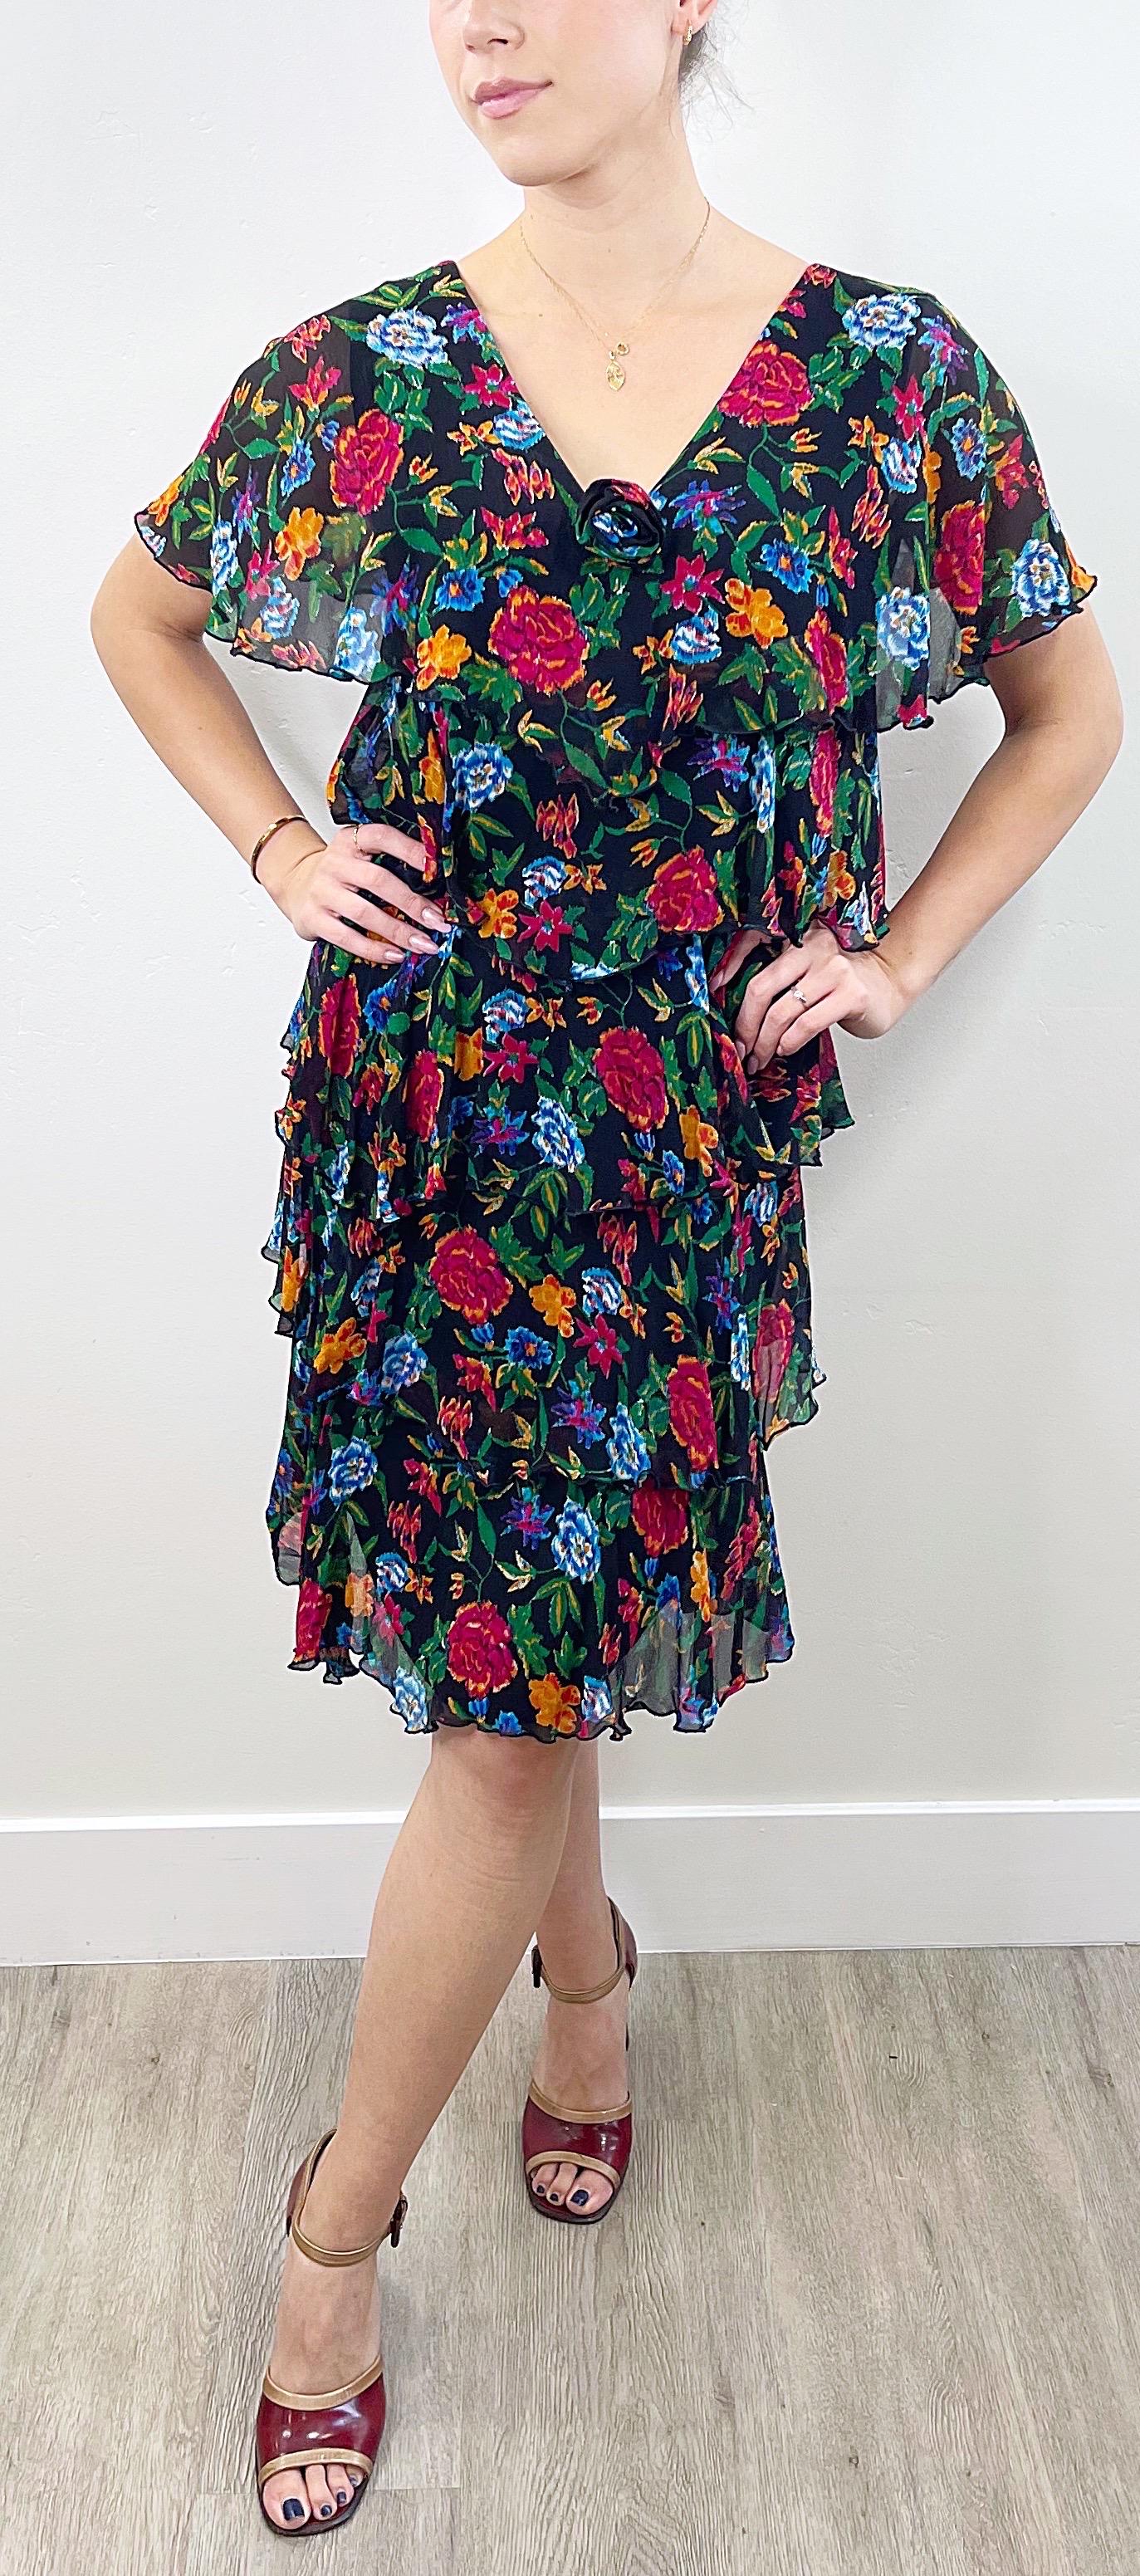 Chic late 70s HOLLY’S HARP silk chiffon colorful floral print tiered dress ! Features a black background with vibrant colors of green, blue, pink, orange and red throughout. Simply slips over the head. Perfect for any day or evening event. Pair with